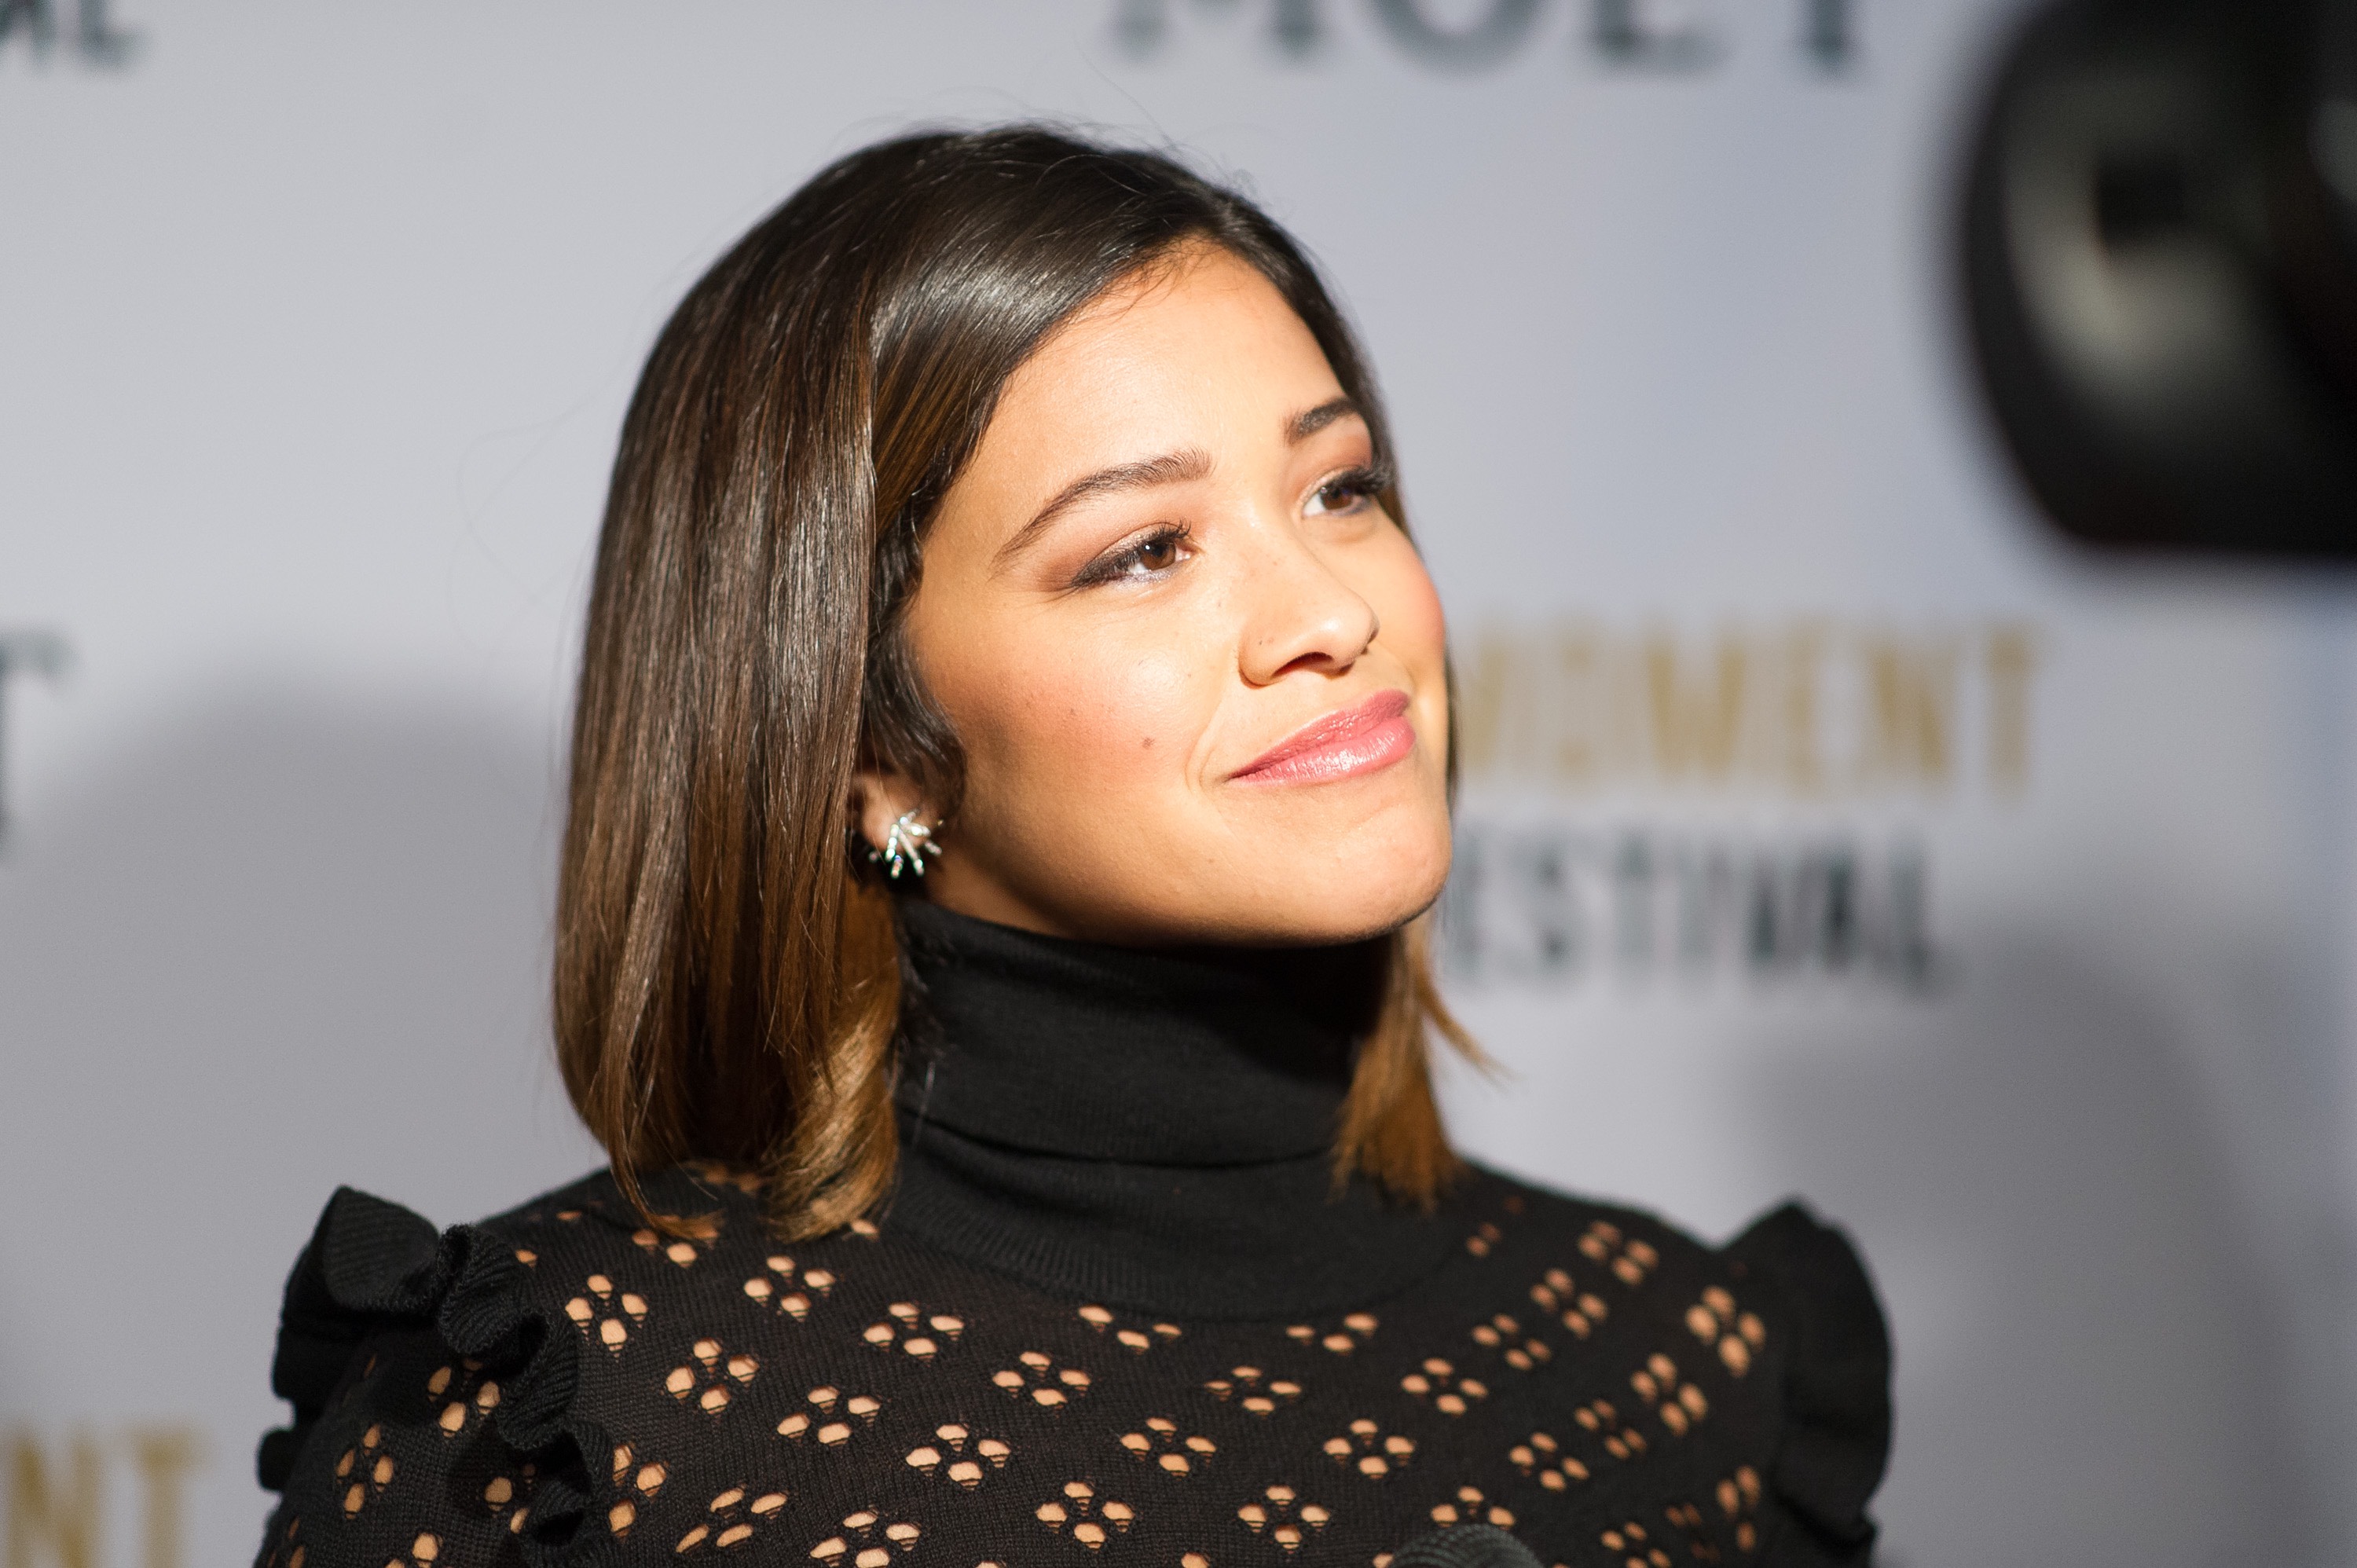 Actress Gina Rodriguez Stars As the New Face of Anne Klein